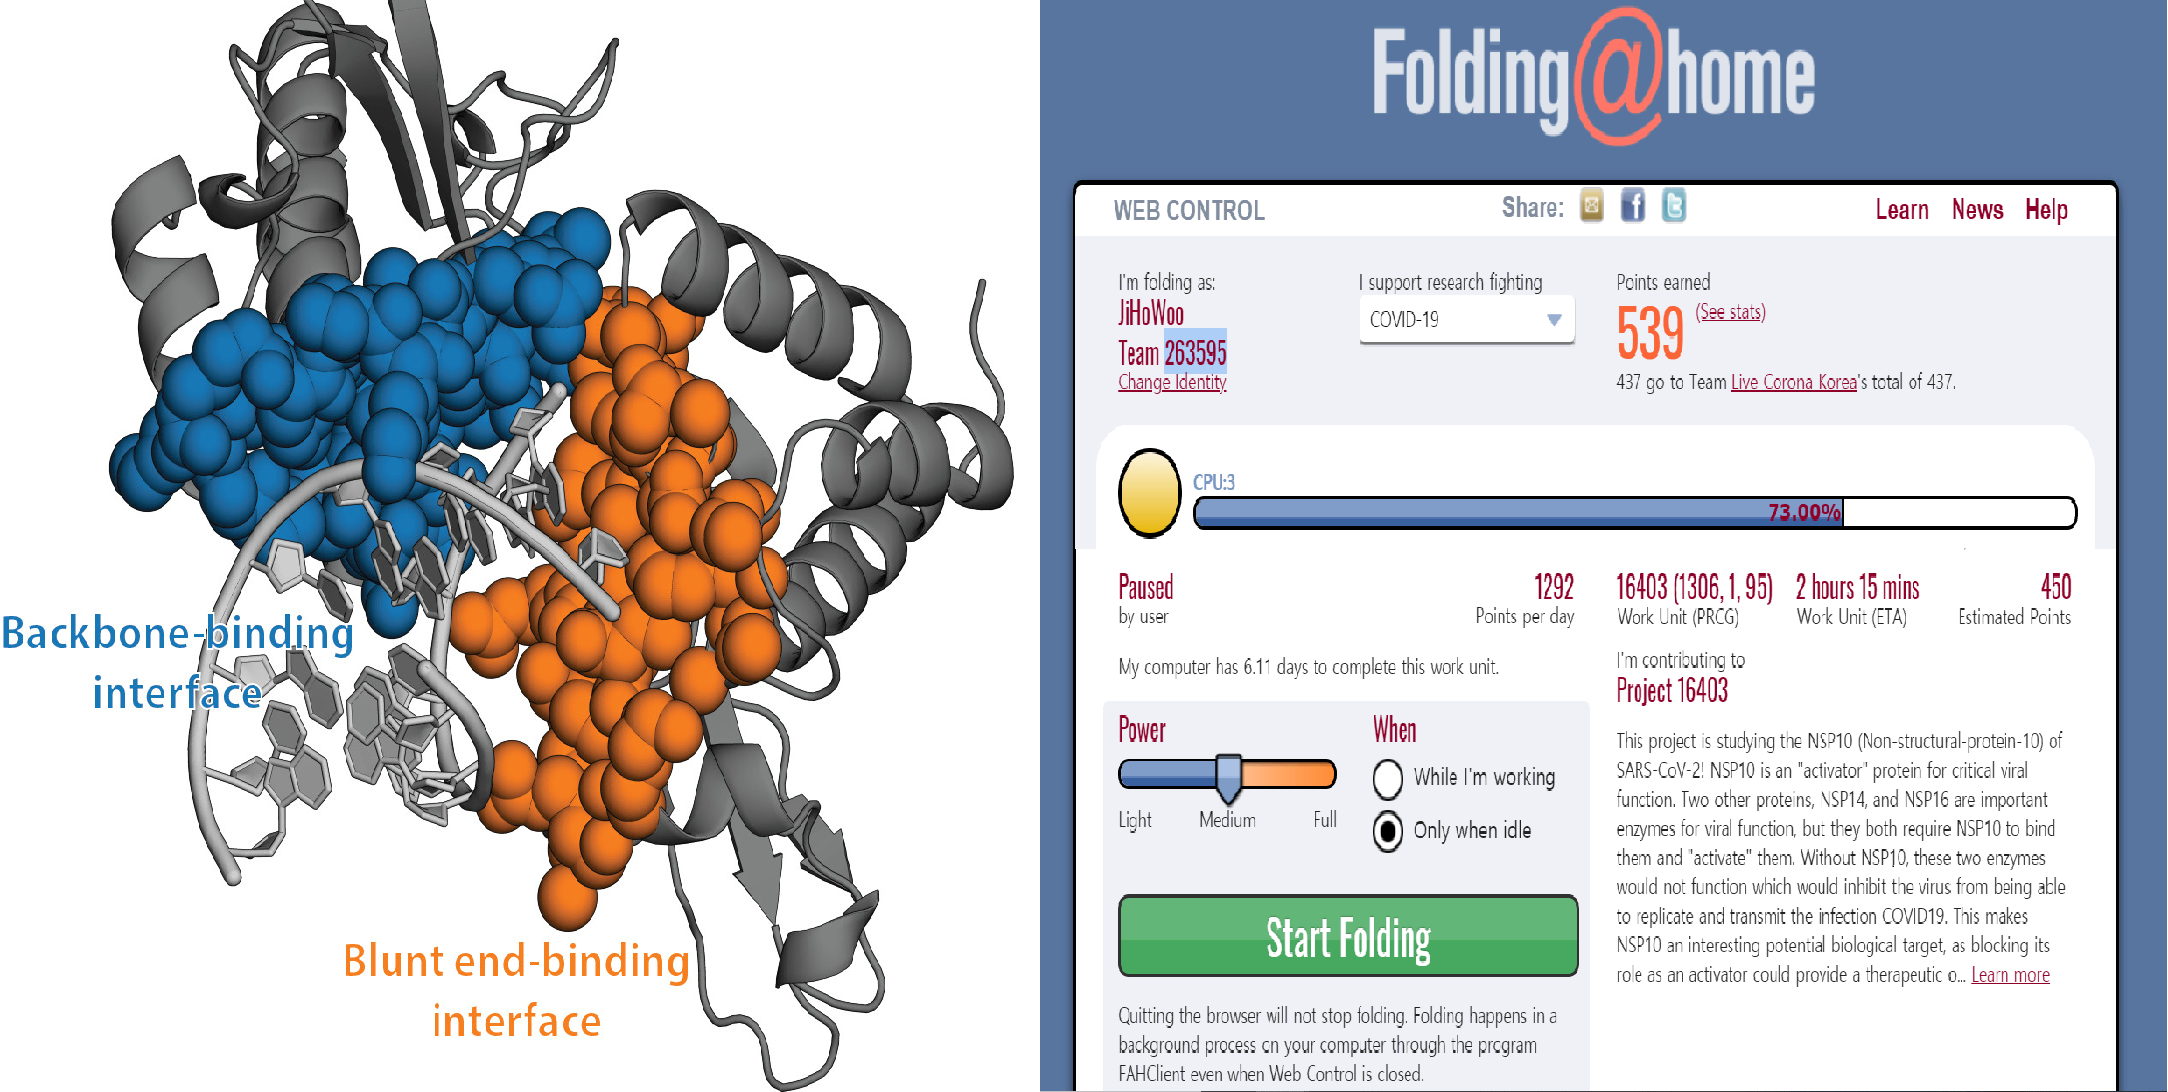 protein folding+F@H explanation image